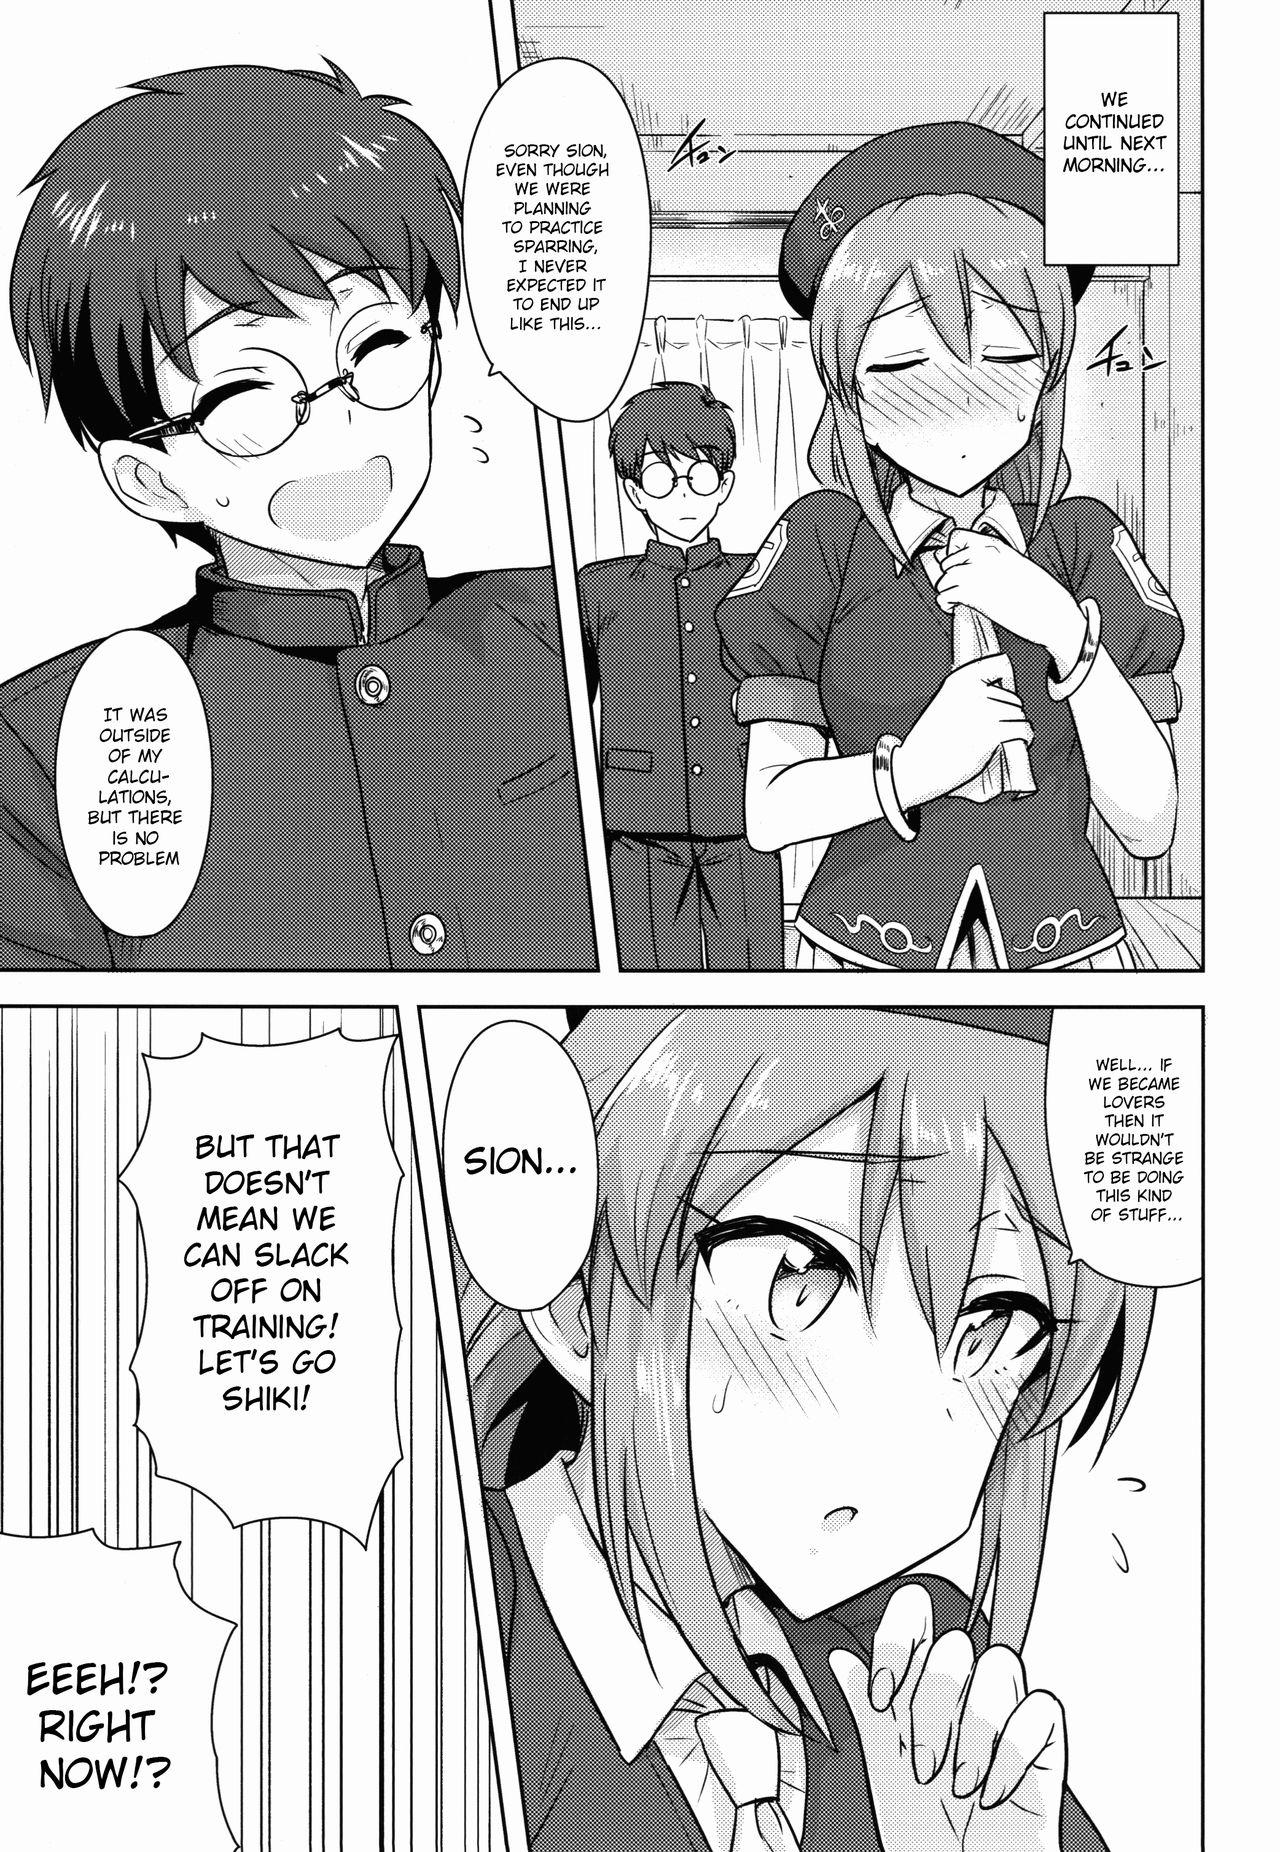 Bj Aru Hi no Futari MelBlo Hen | A Certain Day with Each Other Melty Blood Hen - Tsukihime Pink - Page 8